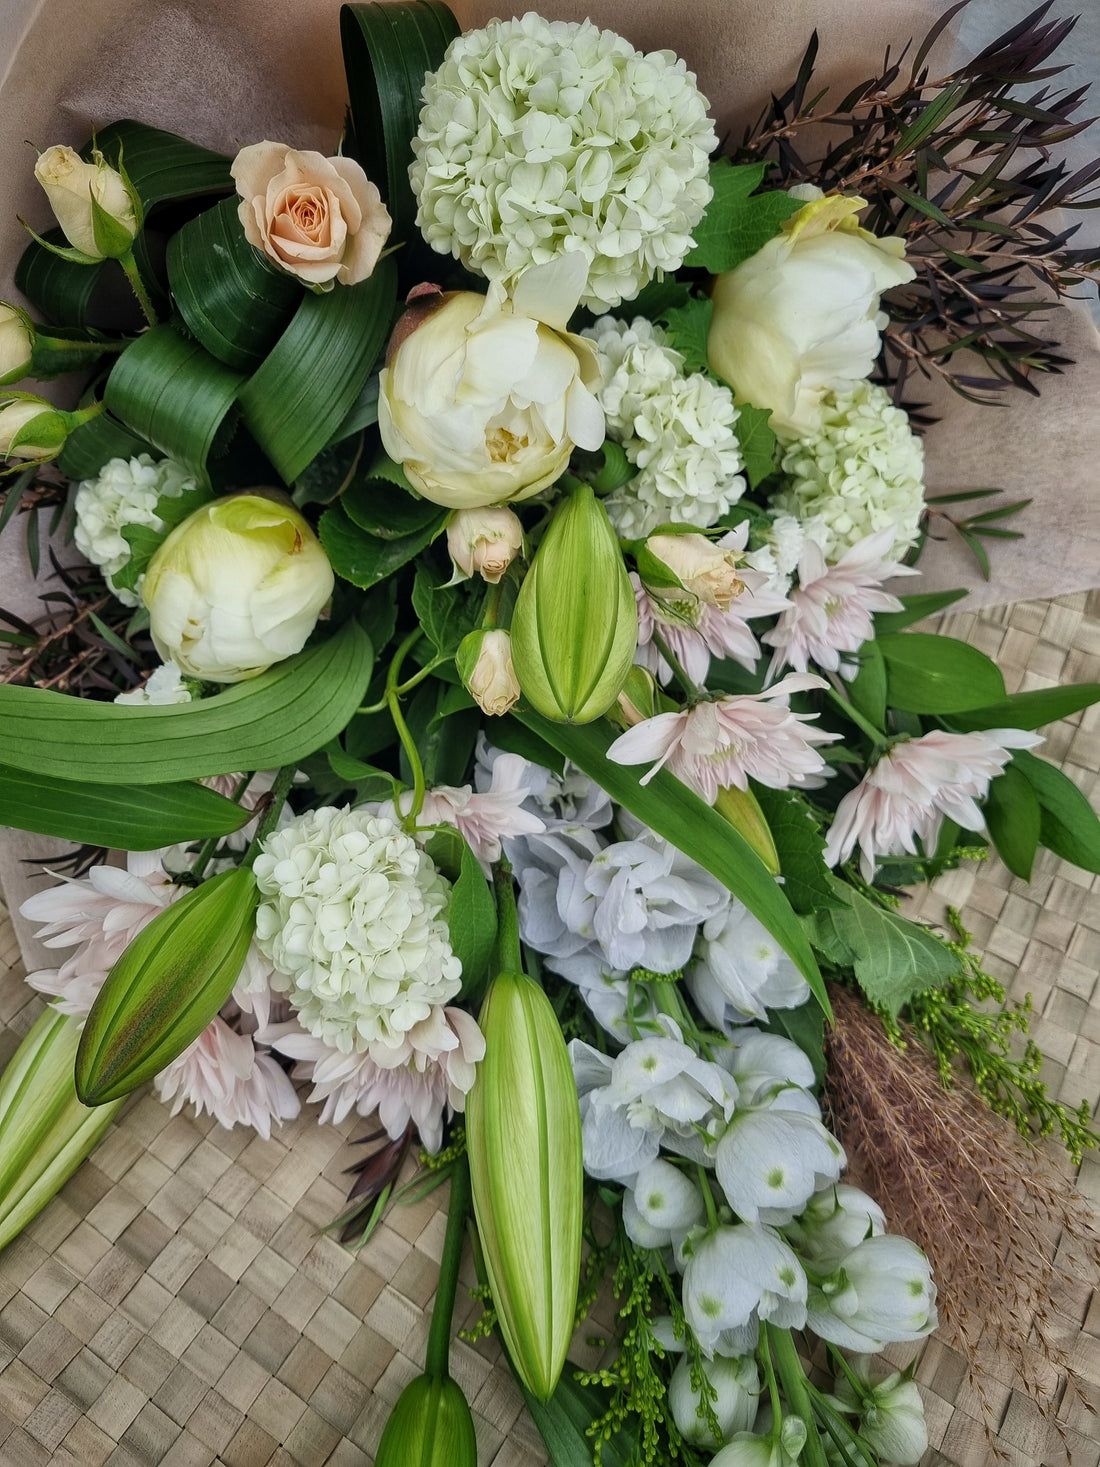 Naturally Neutral floral arrangement by Valley Bloom, with soft white and pastel coloured flowers and green foliage.